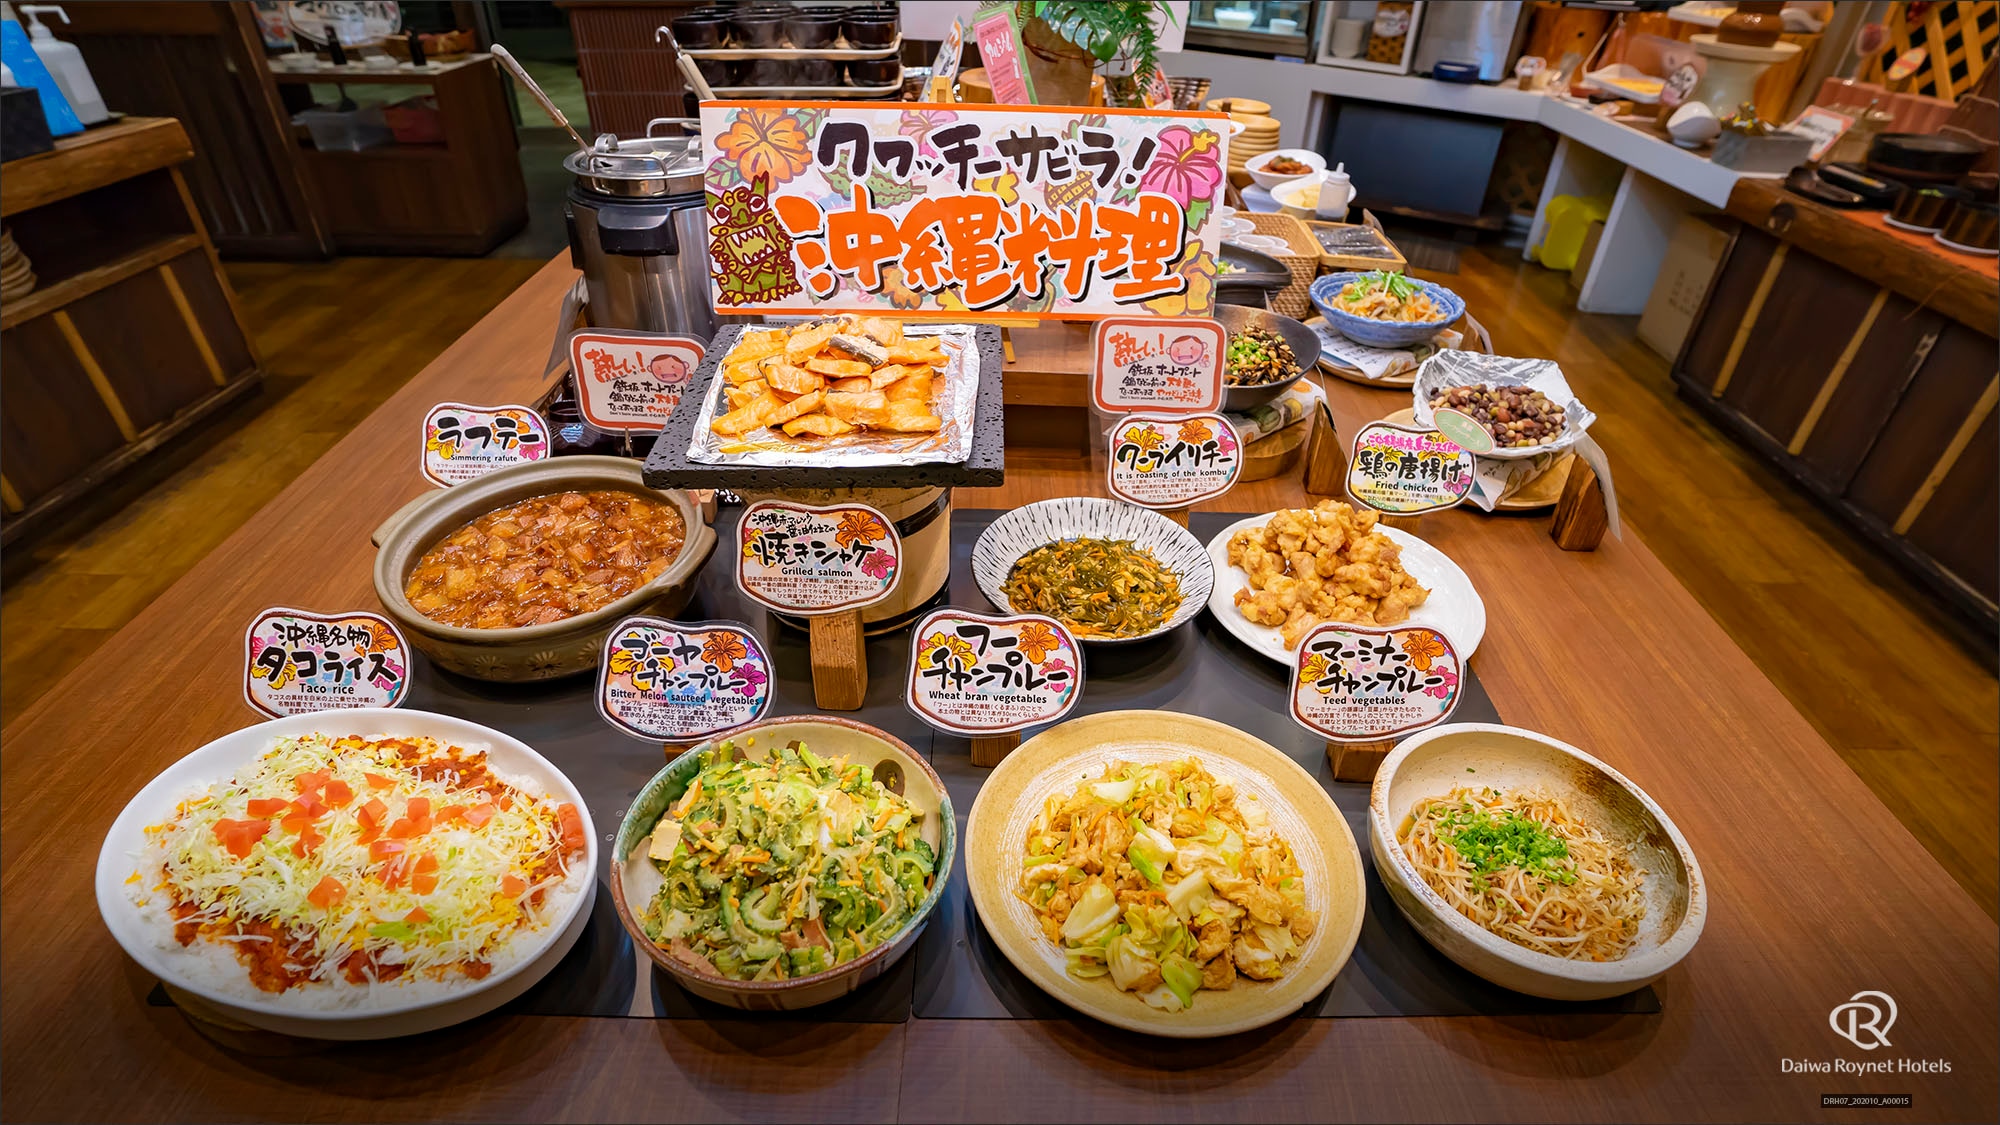 ◆ Wide variety of Okinawan dishes